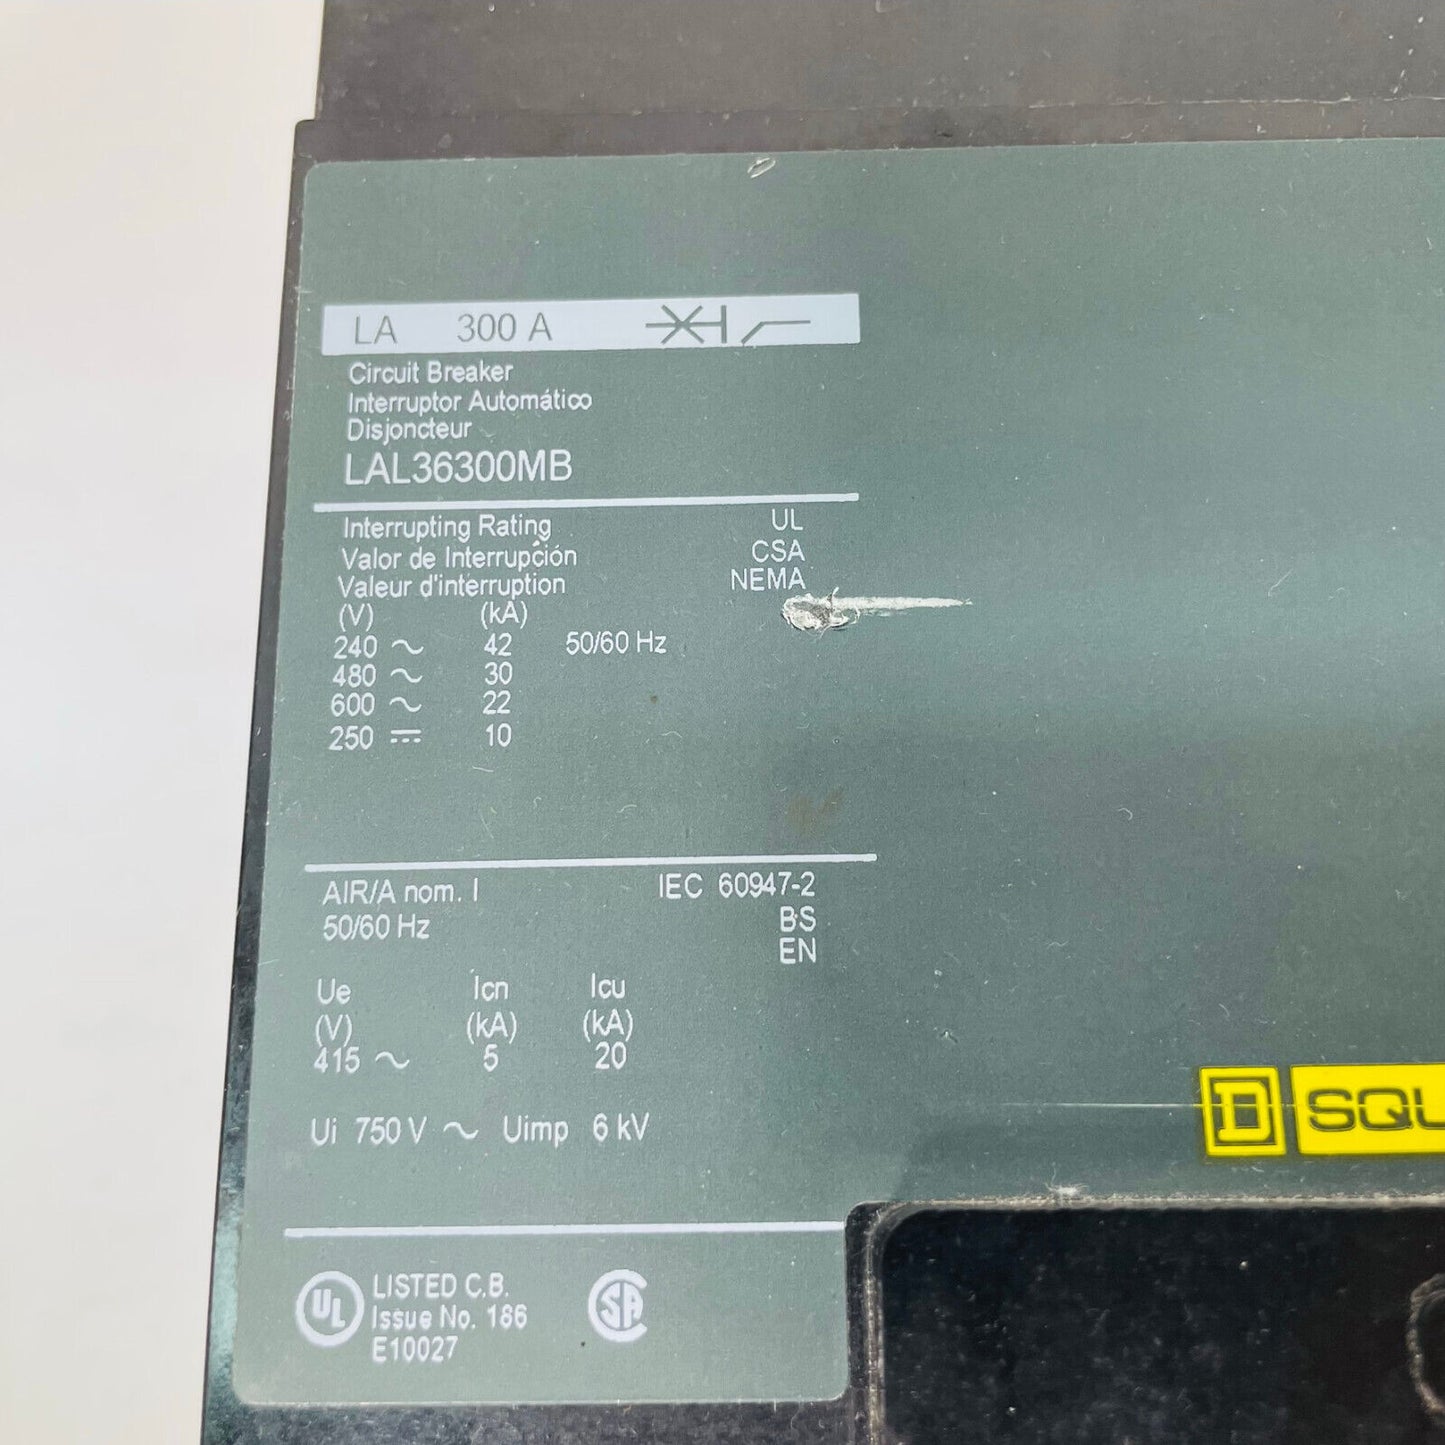 New open Square D LAL36300MB Molded Case Circuit Breaker